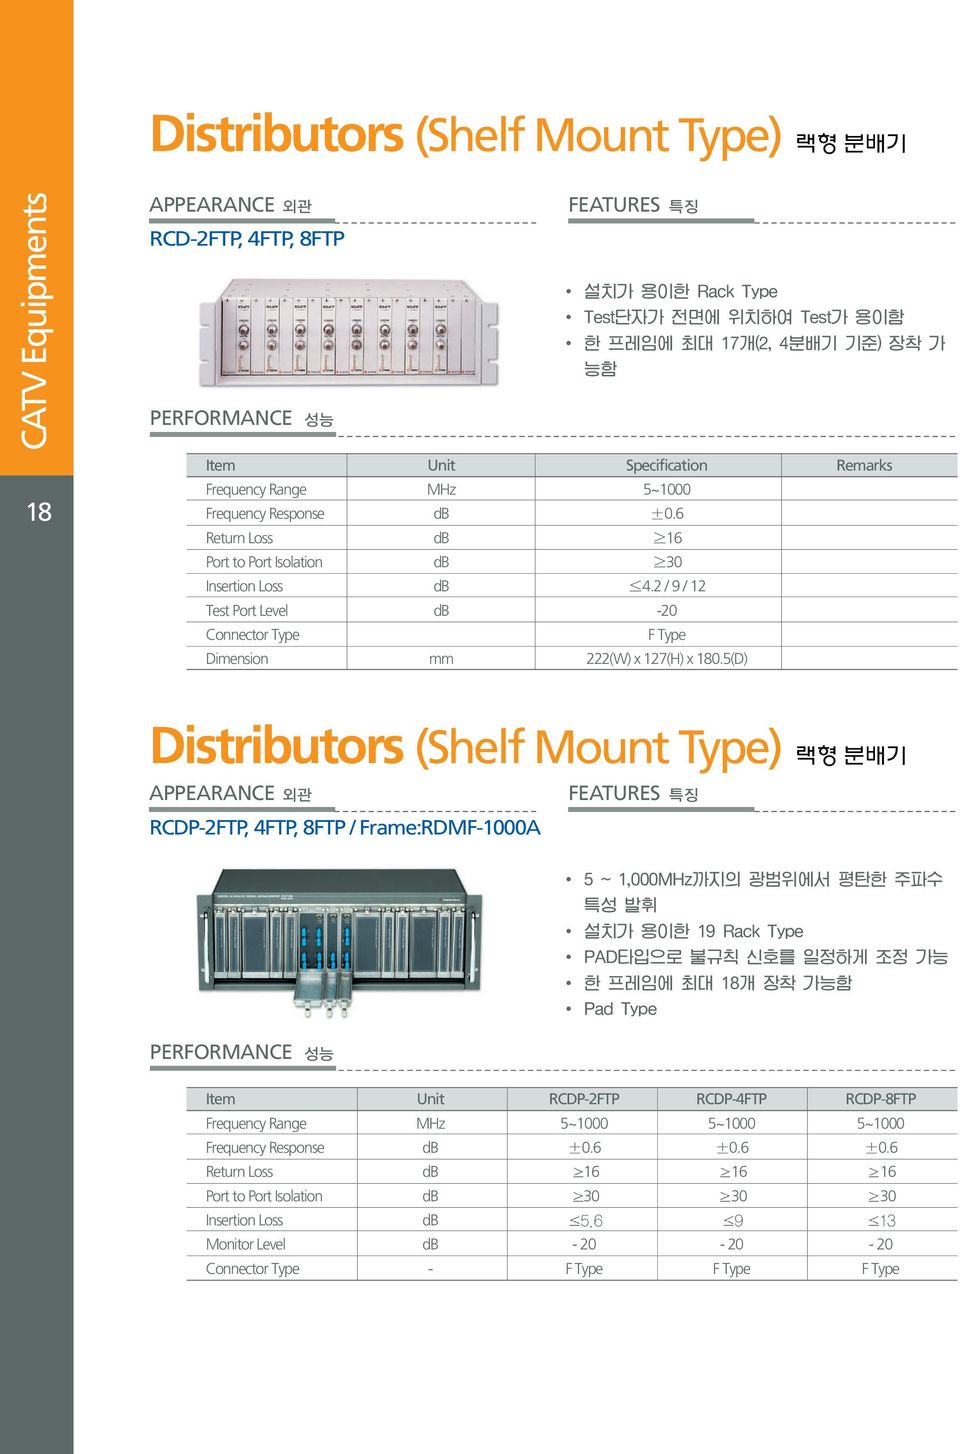 5(D) Distributors (Shelf Mount Type) APPEARANCE RCDP-2FTP, 4FTP, 8FTP / Frame:RDMF-1000A FEATURES PERFORMANCE Item Unit RCDP-2FTP RCDP-4FTP RCDP-8FTP Frequency Range MHz 5~1000